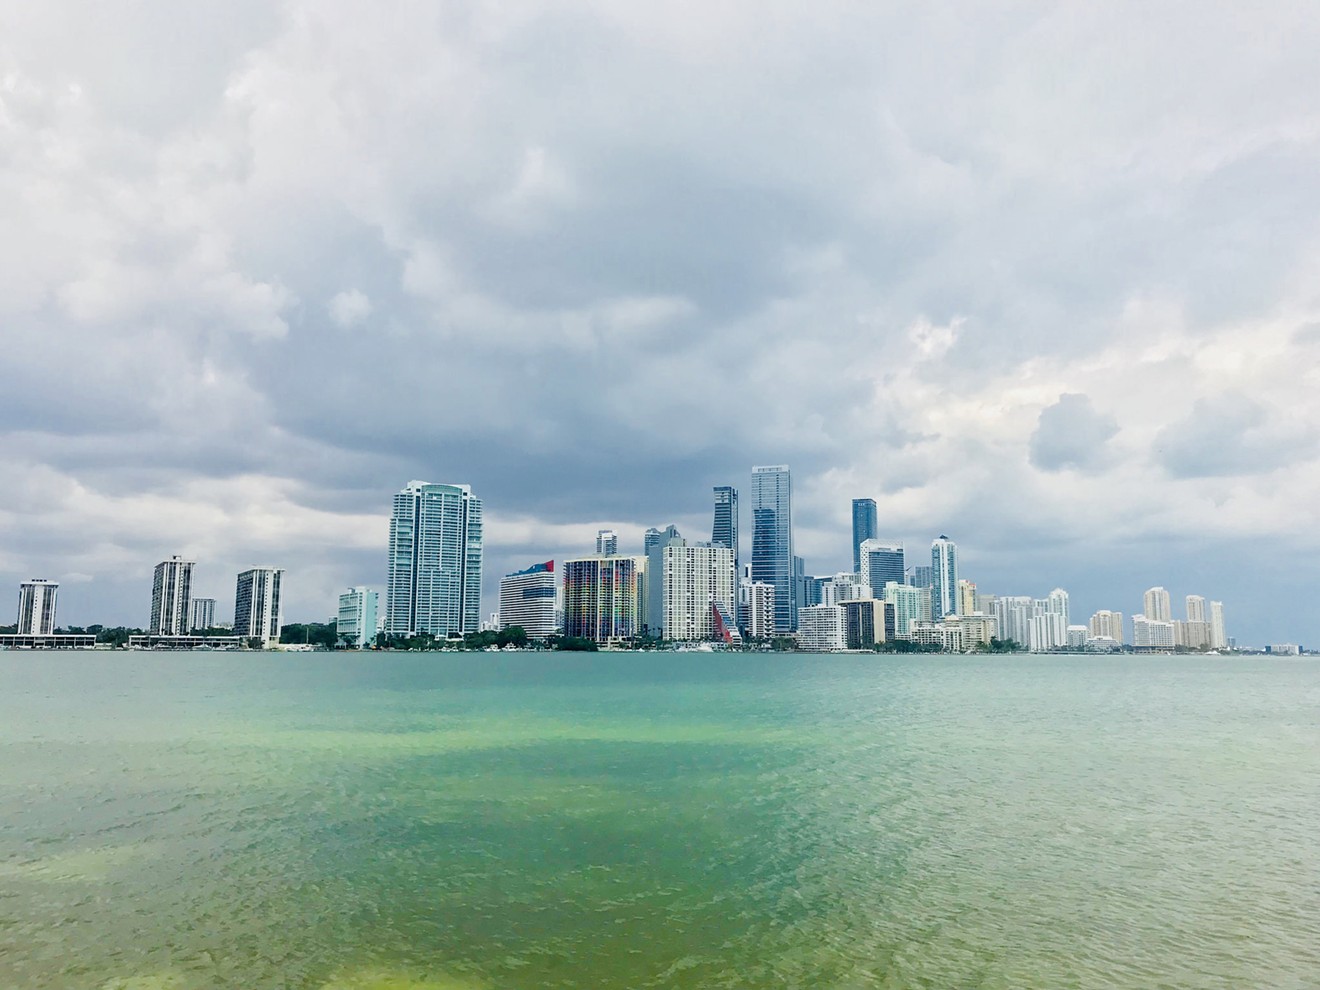 In early August, 1.5 million gallons of raw sewage leaked into Biscayne Bay after a 60-year-old pipe ruptured.